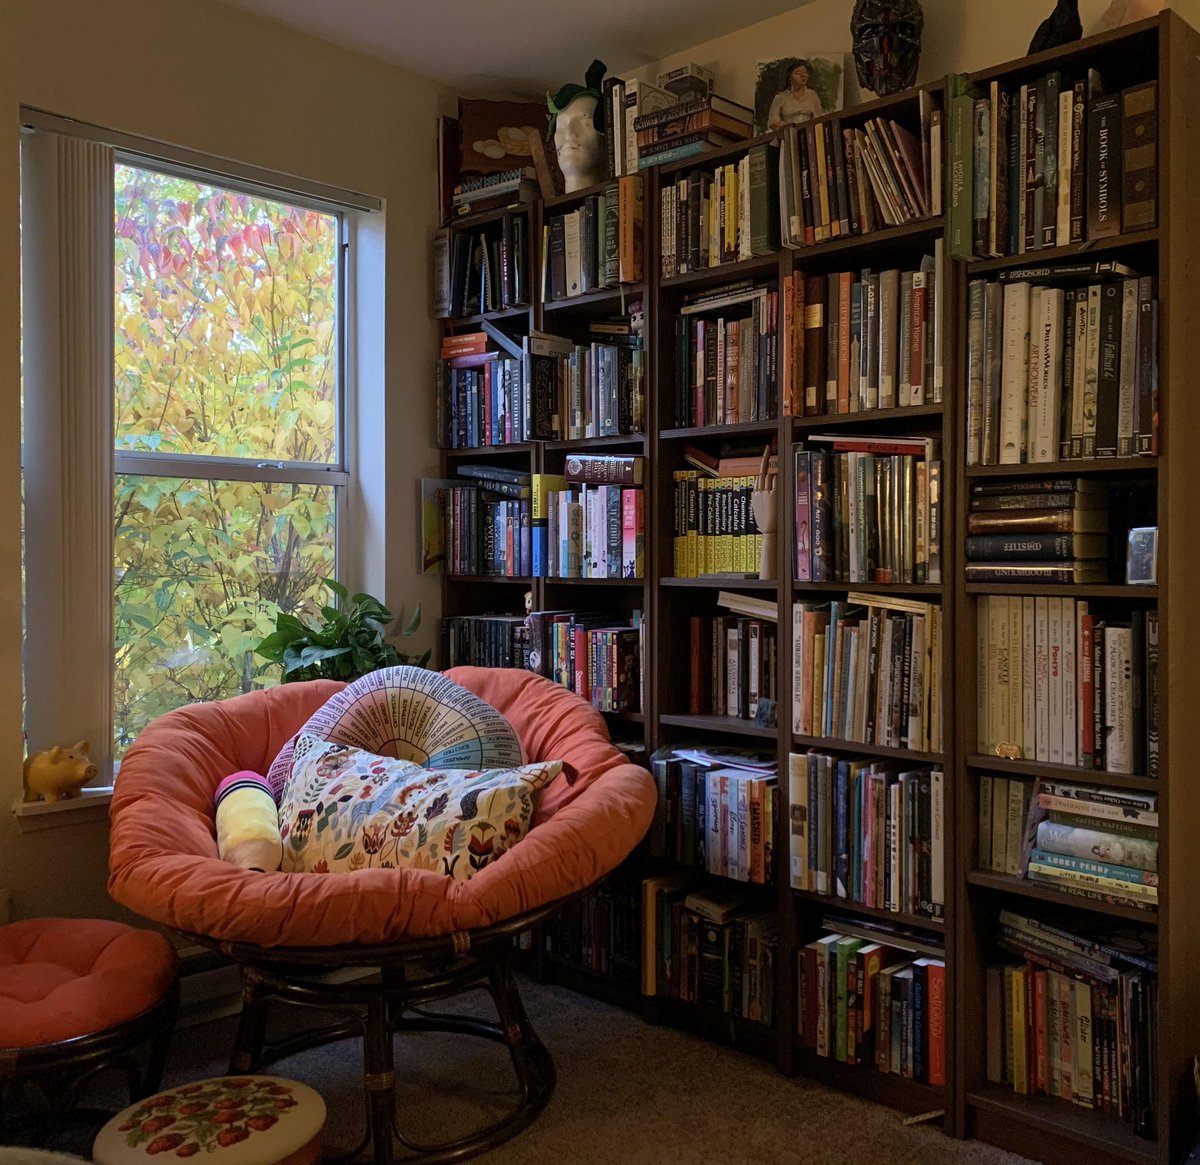 A dream reading place. 
The most favorite spot in the house. A perfect Book corner. #BookCorner #FavoriteSpot 📚